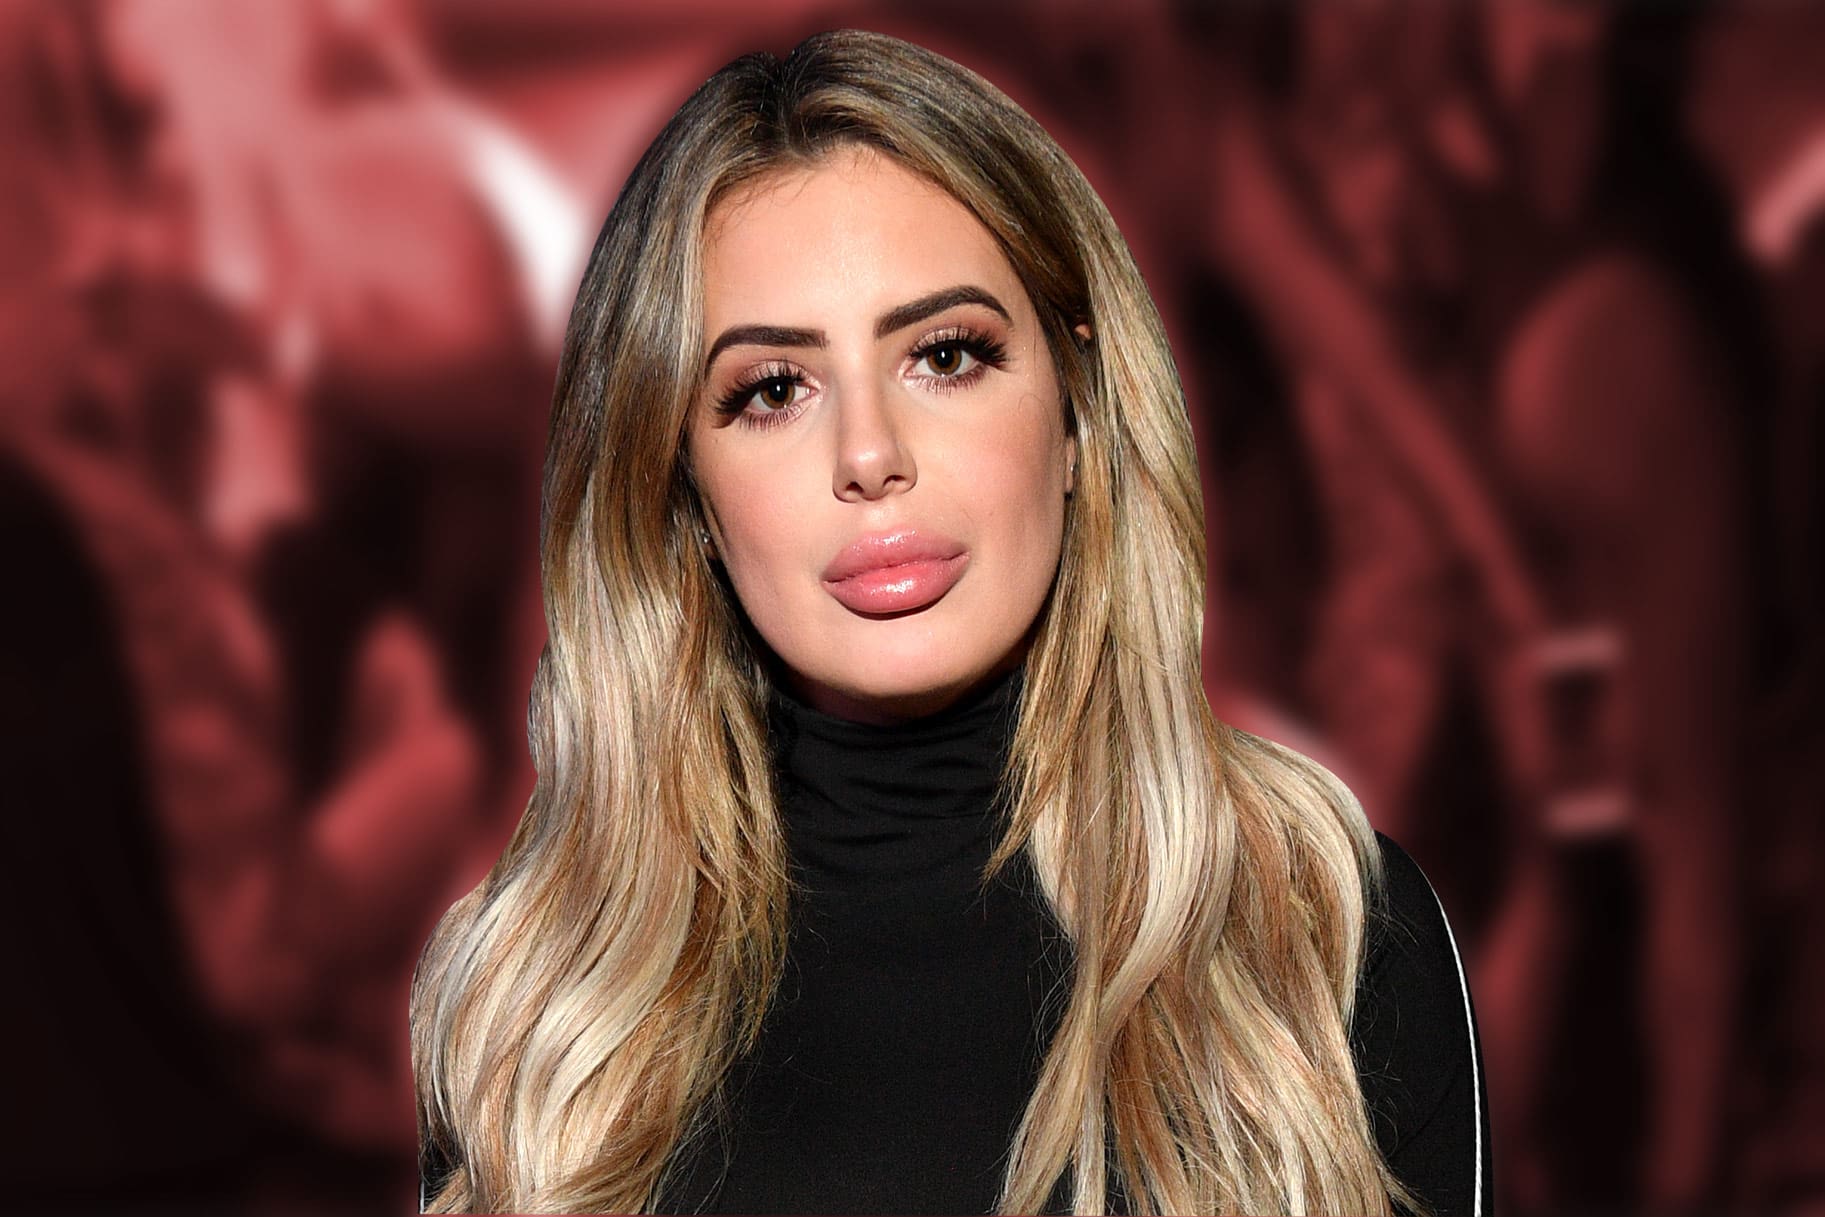 ”brielle-biermanns-huge-lips-slammed-for-looking-like-she-had-an-allergic-reaction-after-posting-new-pic”